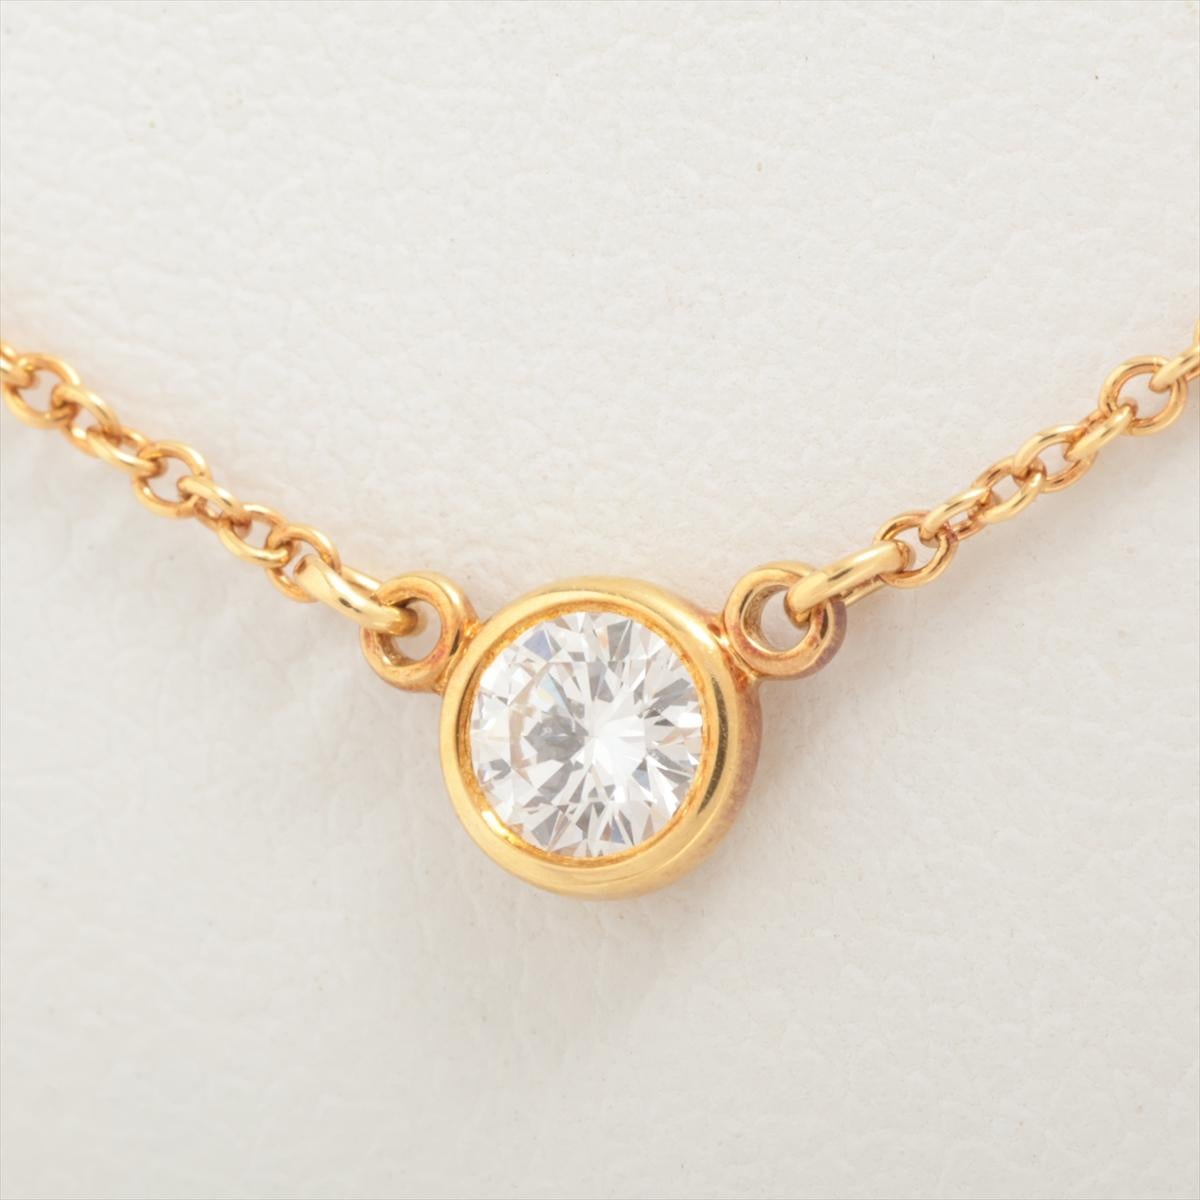 The Tiffany & Co. Diamonds by the Yard Necklace in gold is a stunning and versatile piece of jewelry that embodies the brand's legacy of luxury and craftsmanship. Crafted from high-quality gold, the necklace boasts a warm and radiant hue that